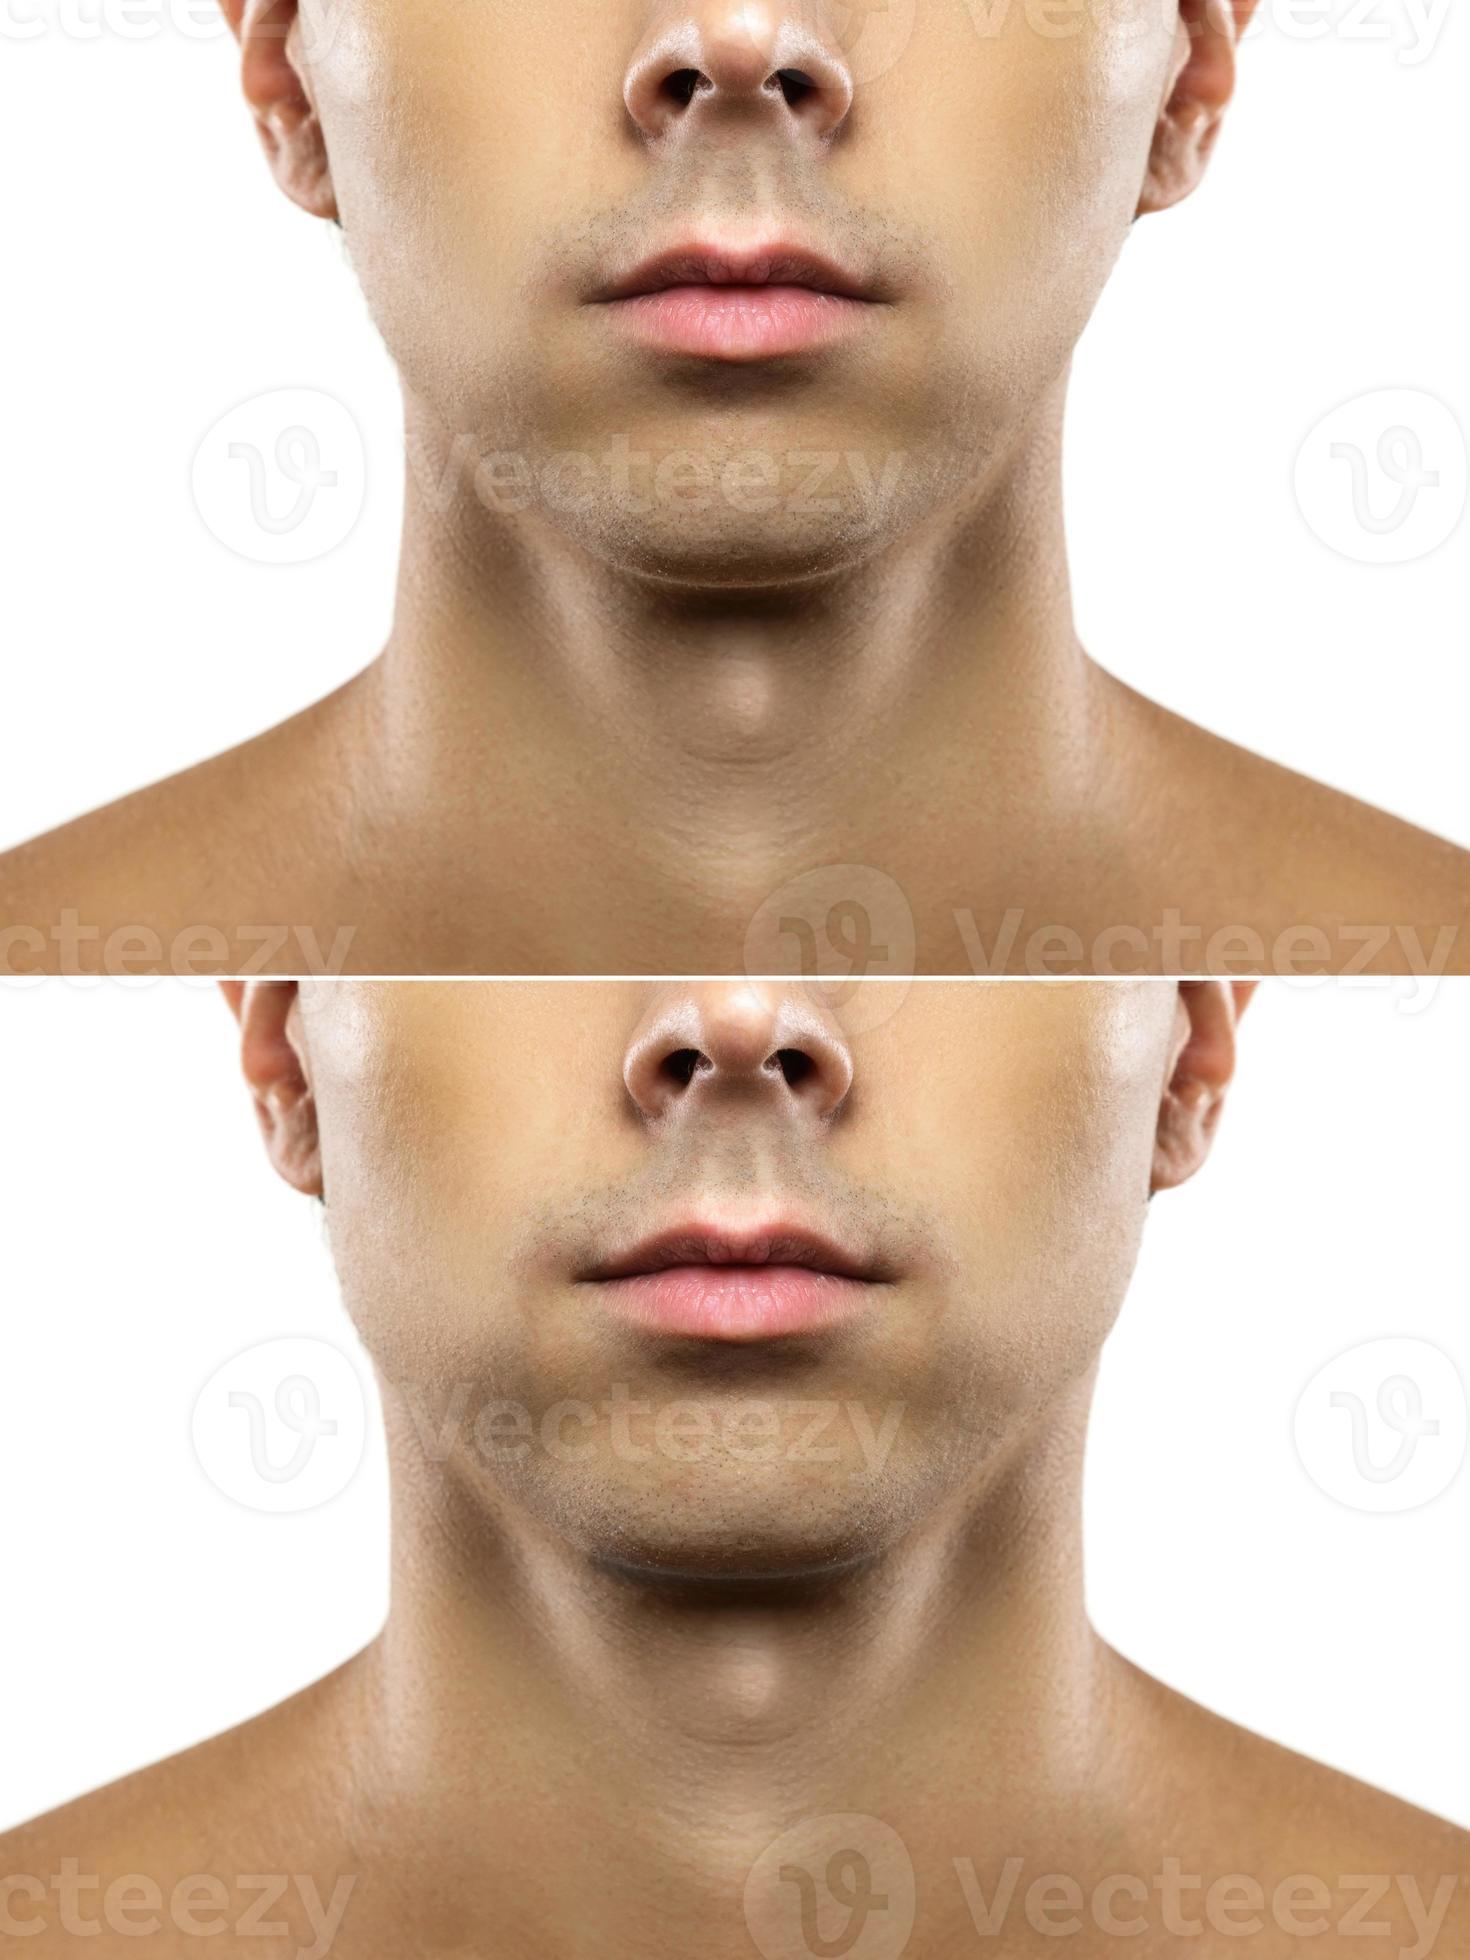 Surgery or mewing exercises. Result of a jawline reshape. 16235513 Stock  Photo at Vecteezy